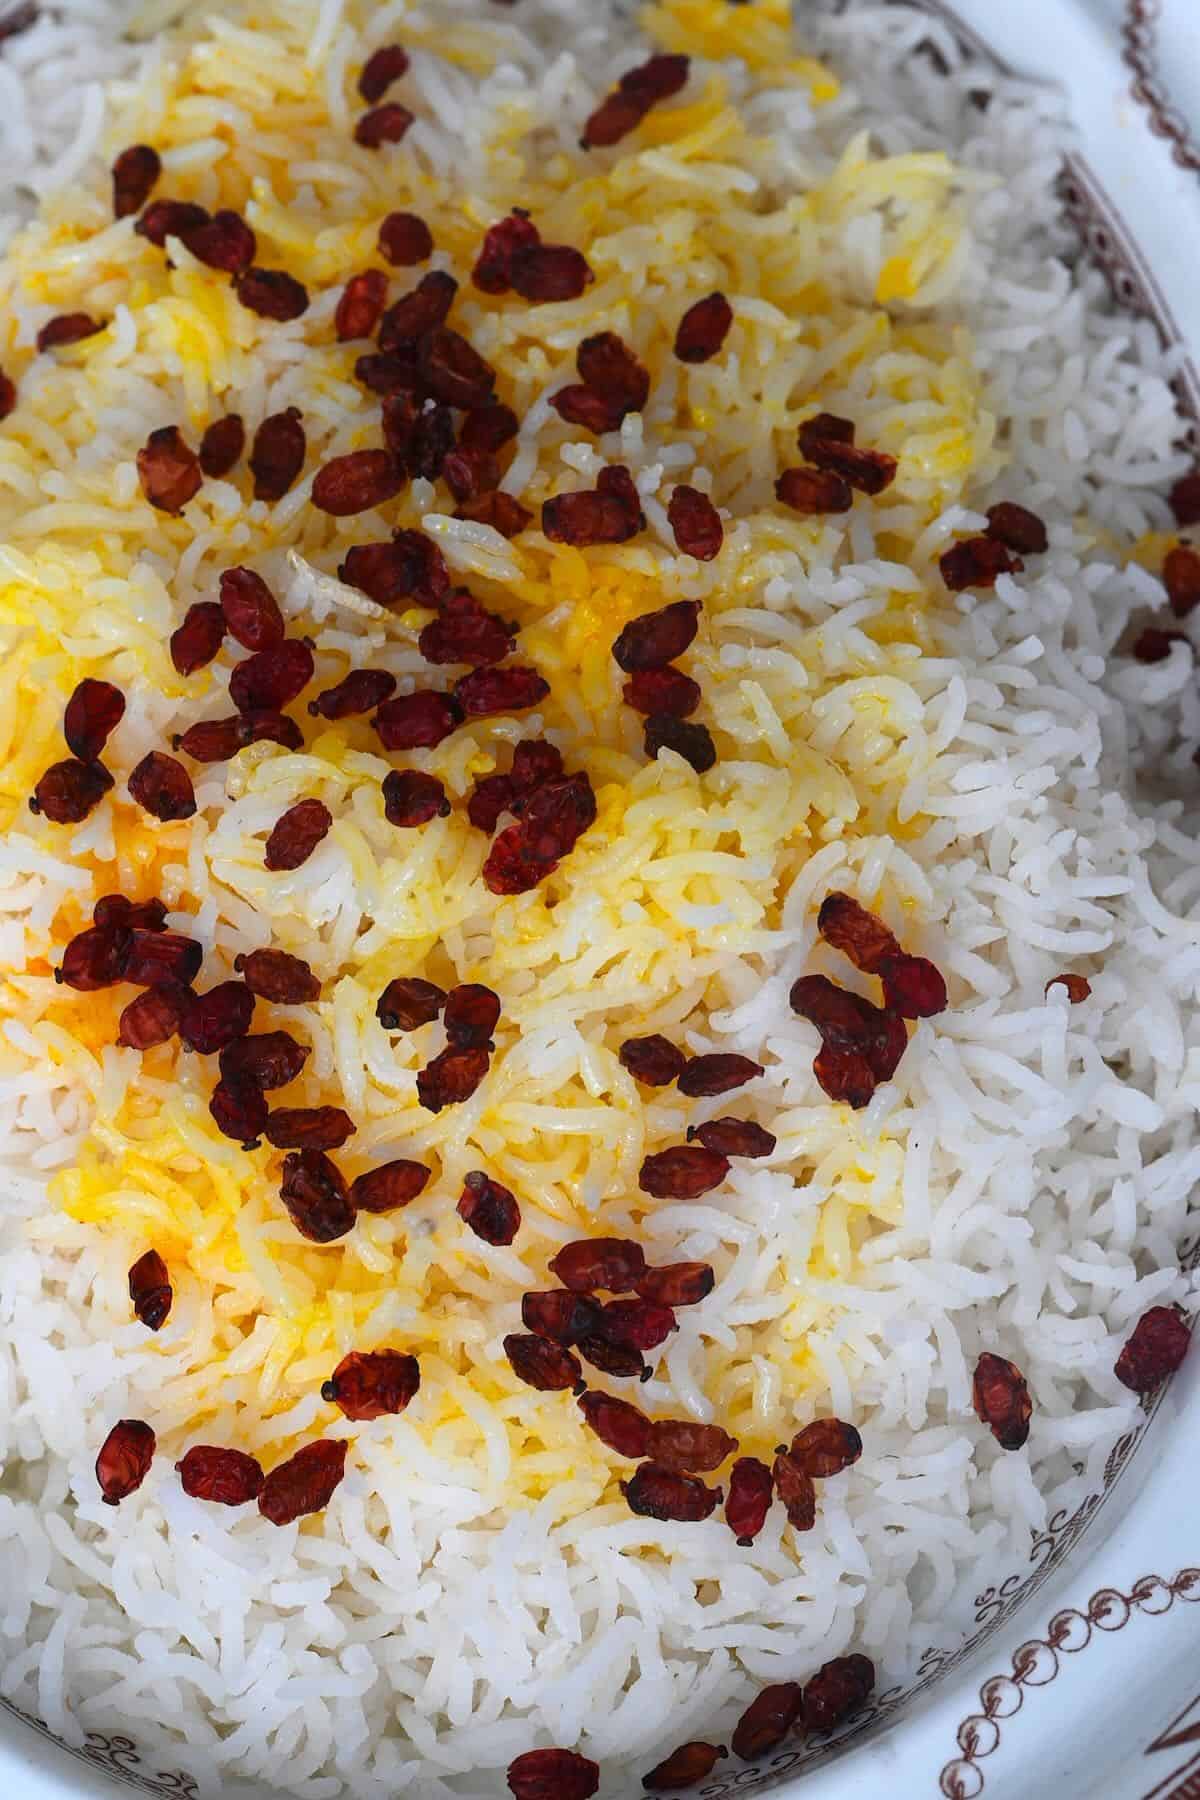 Rice topped with barberries